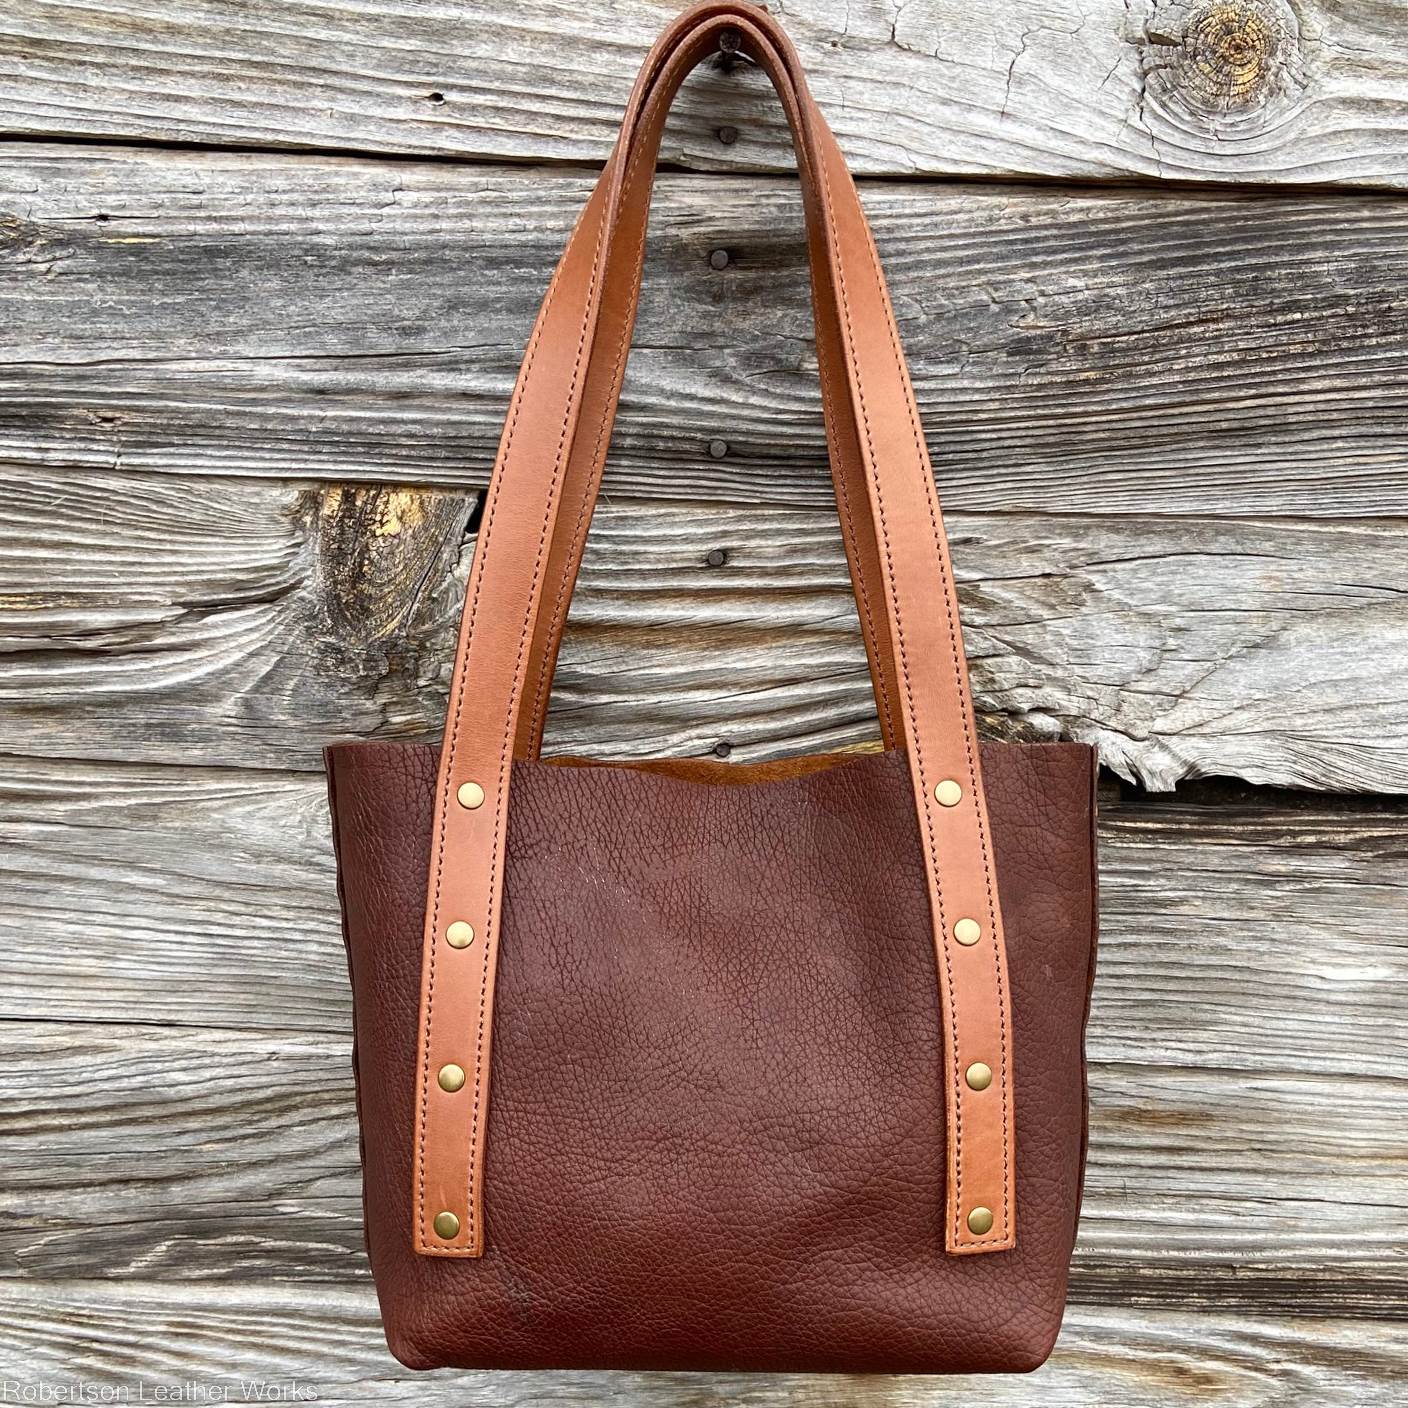 The Mini Quincy Tote in American Bison Leather